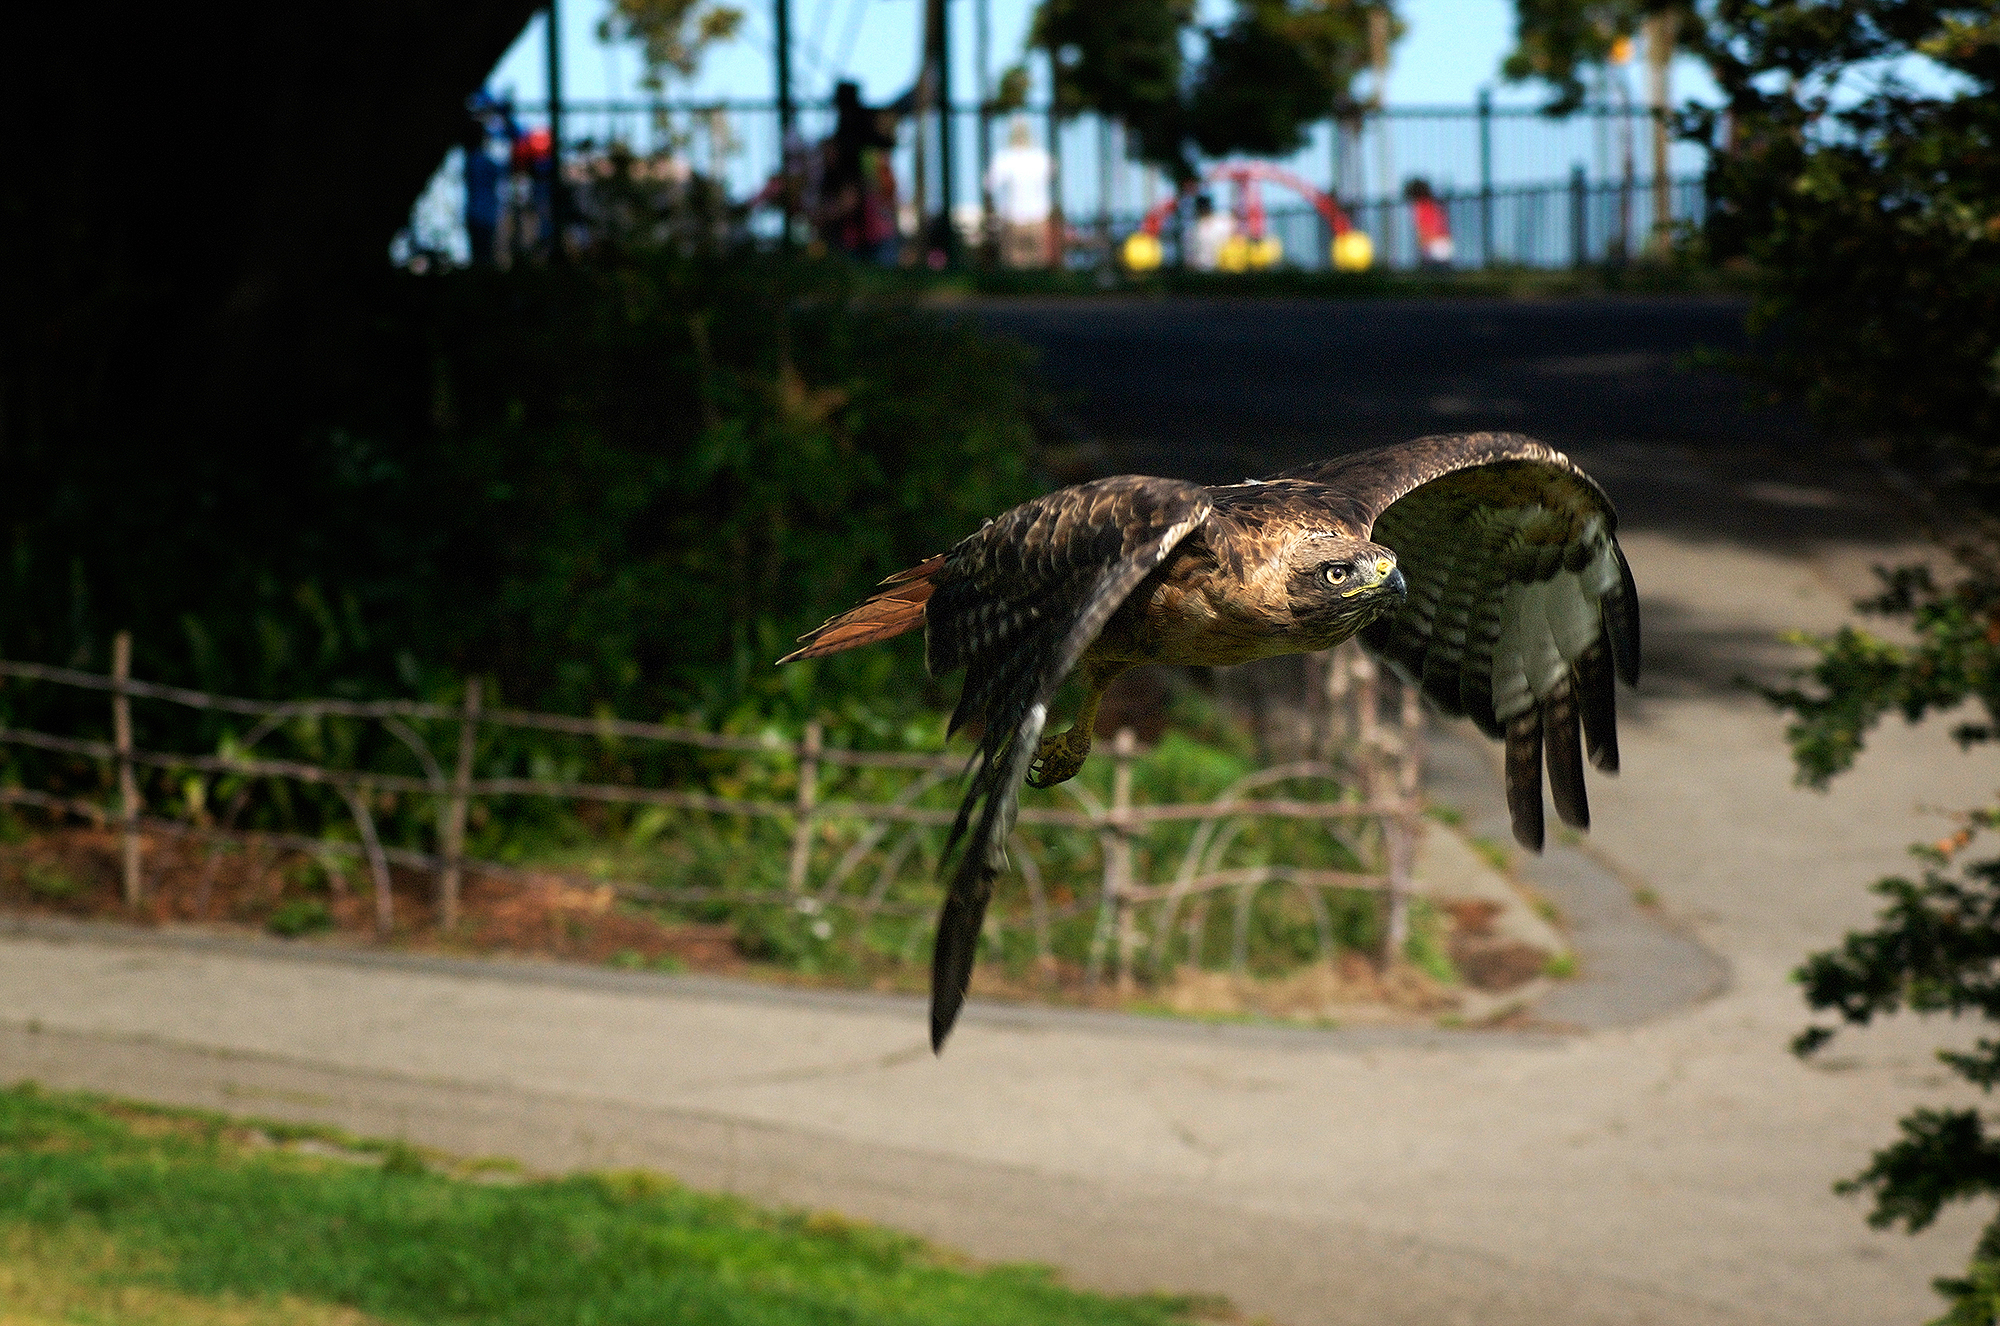 Patch, a Red-tailed Hawk, flying over the landscape of a park, low to the ground, heading toward the photographer and to the right.